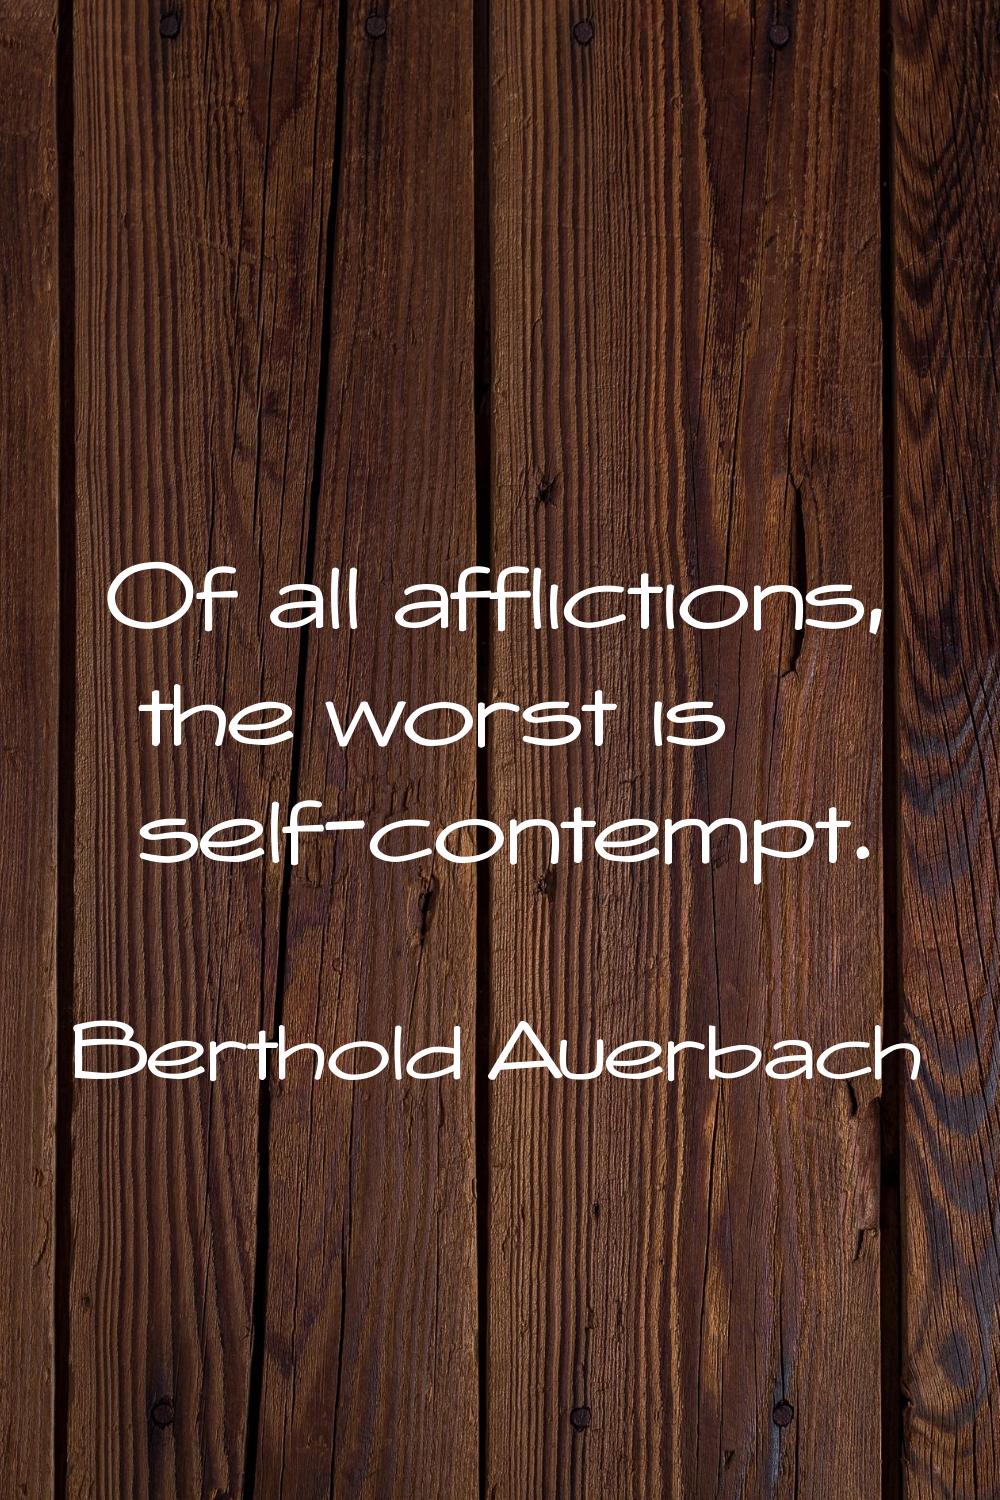 Of all afflictions, the worst is self-contempt.